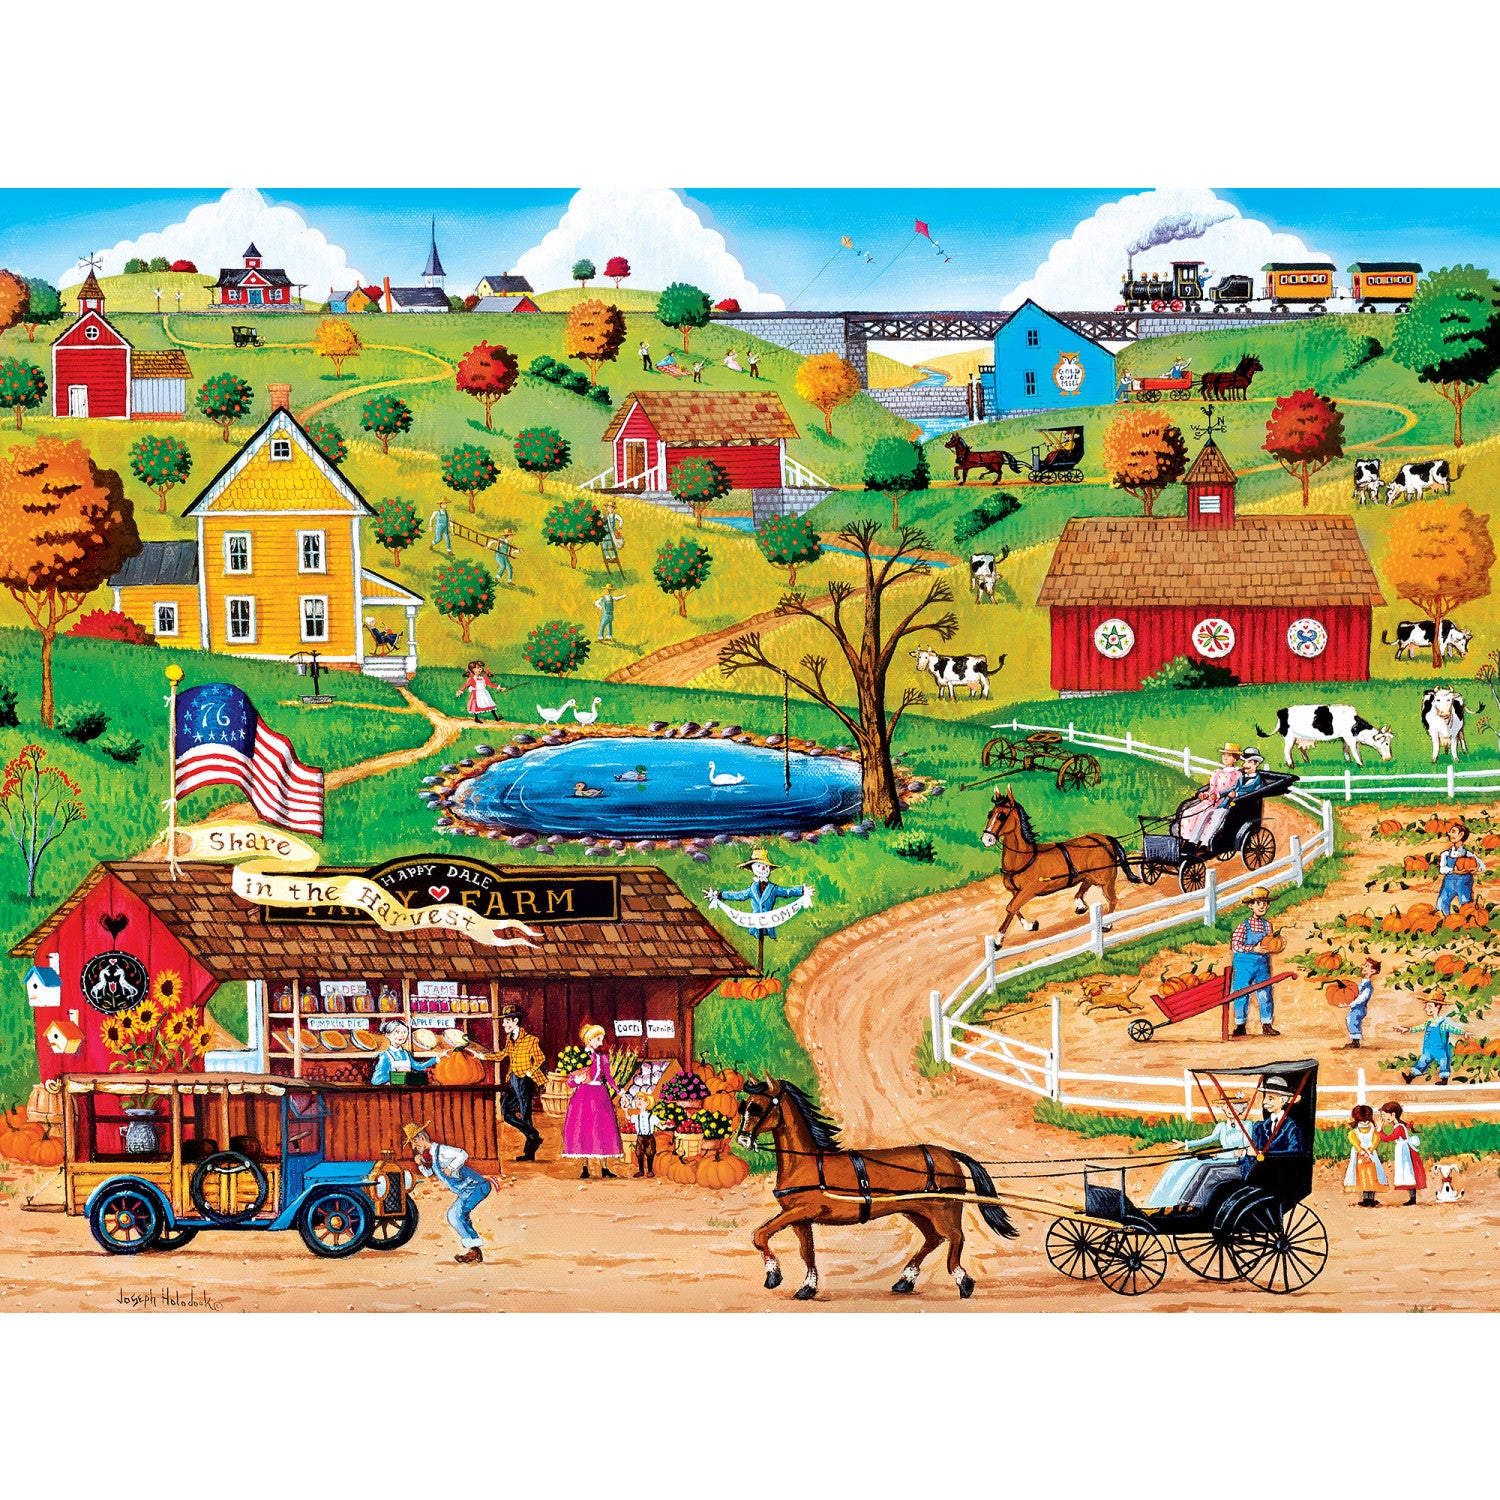 Town & Country - Share in the Harvest 300 Piece EZ Grip Puzzle